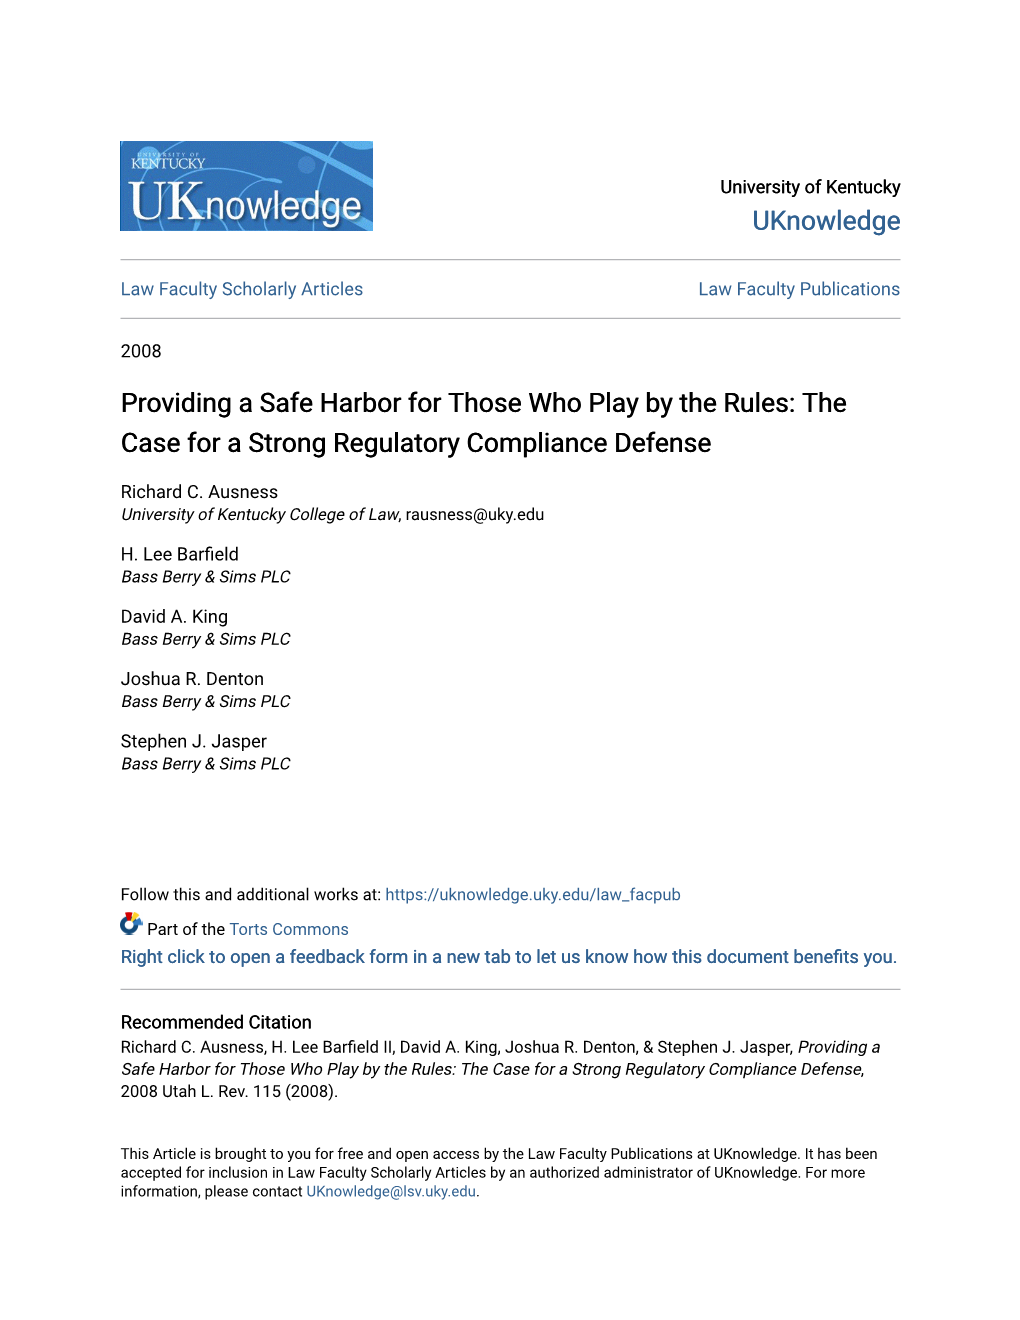 The Case for a Strong Regulatory Compliance Defense